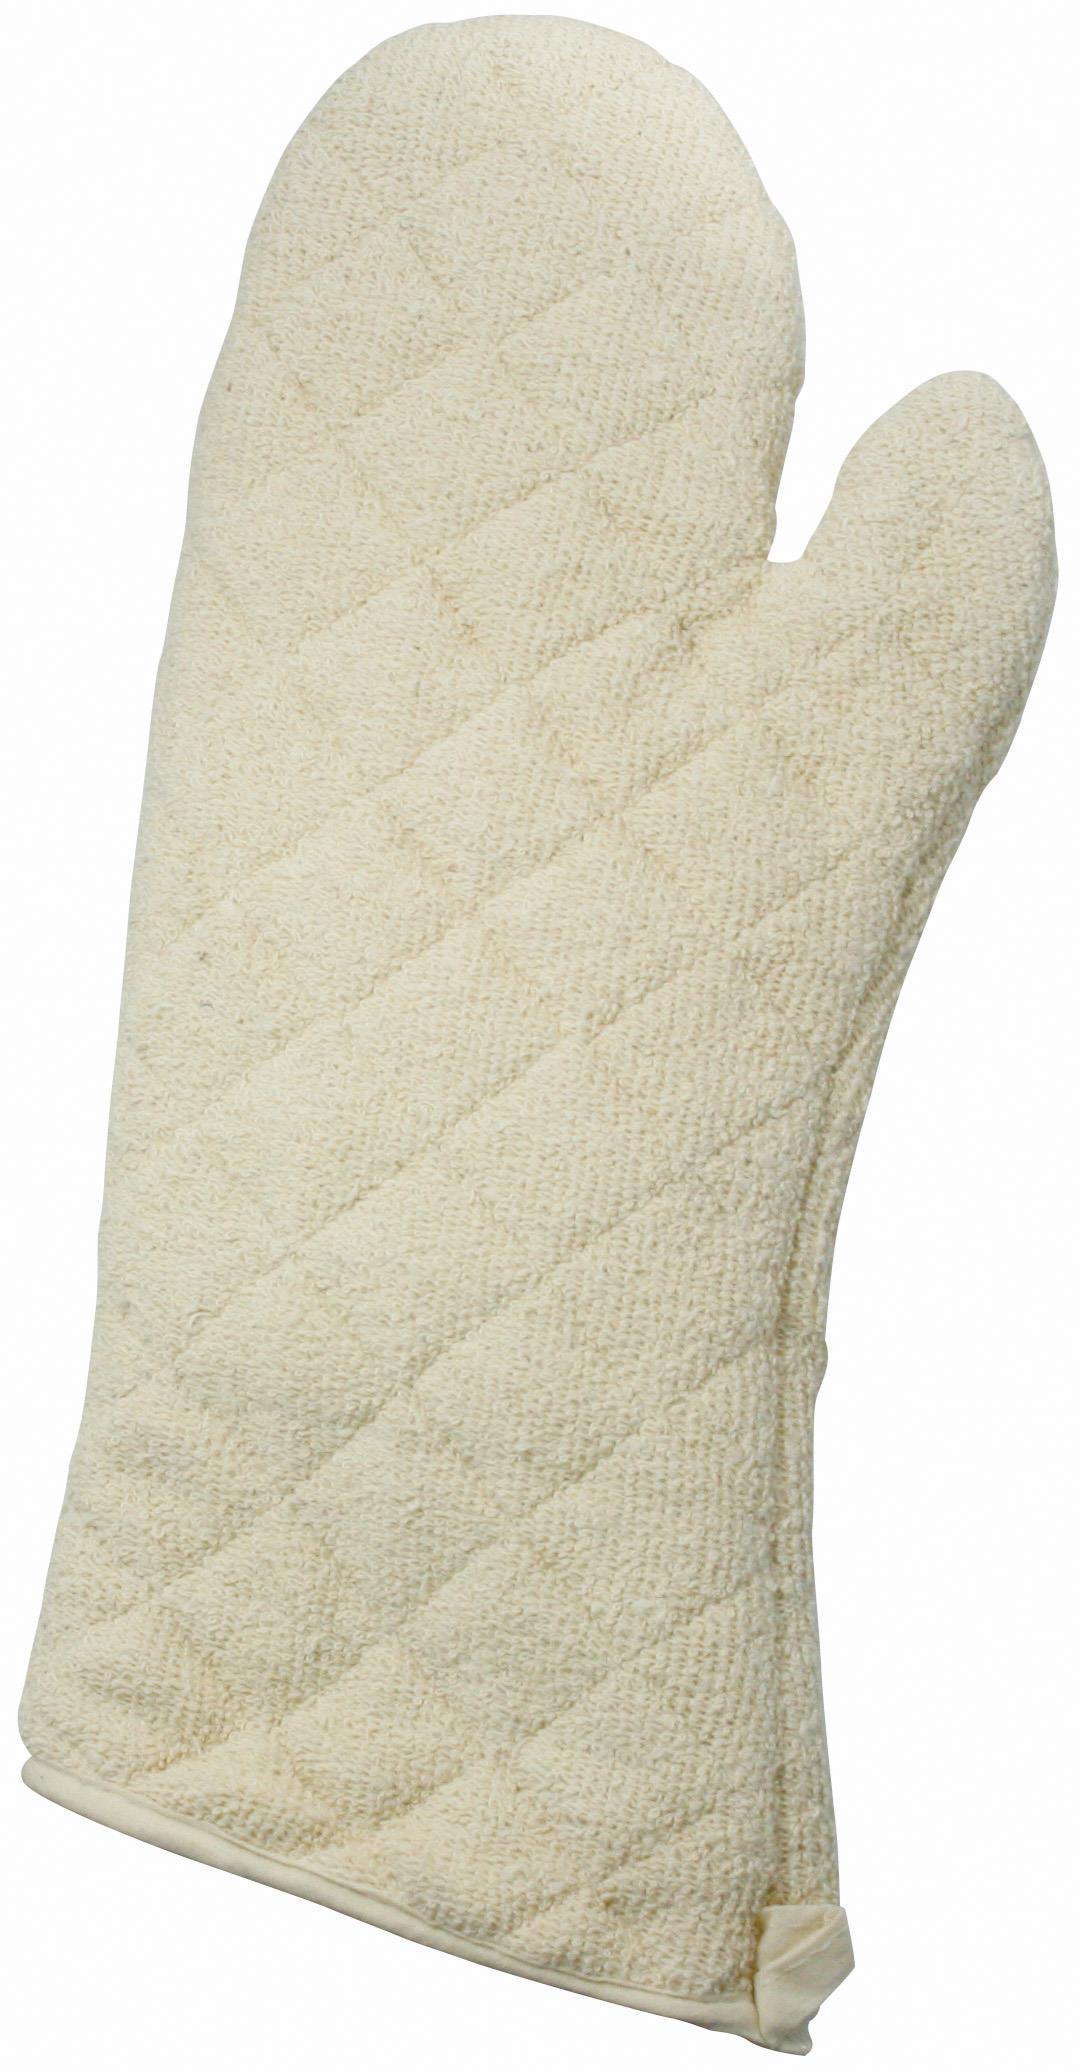 17-inch Terry-Cloth with Silicon Lining Oven Mitt – Omcan